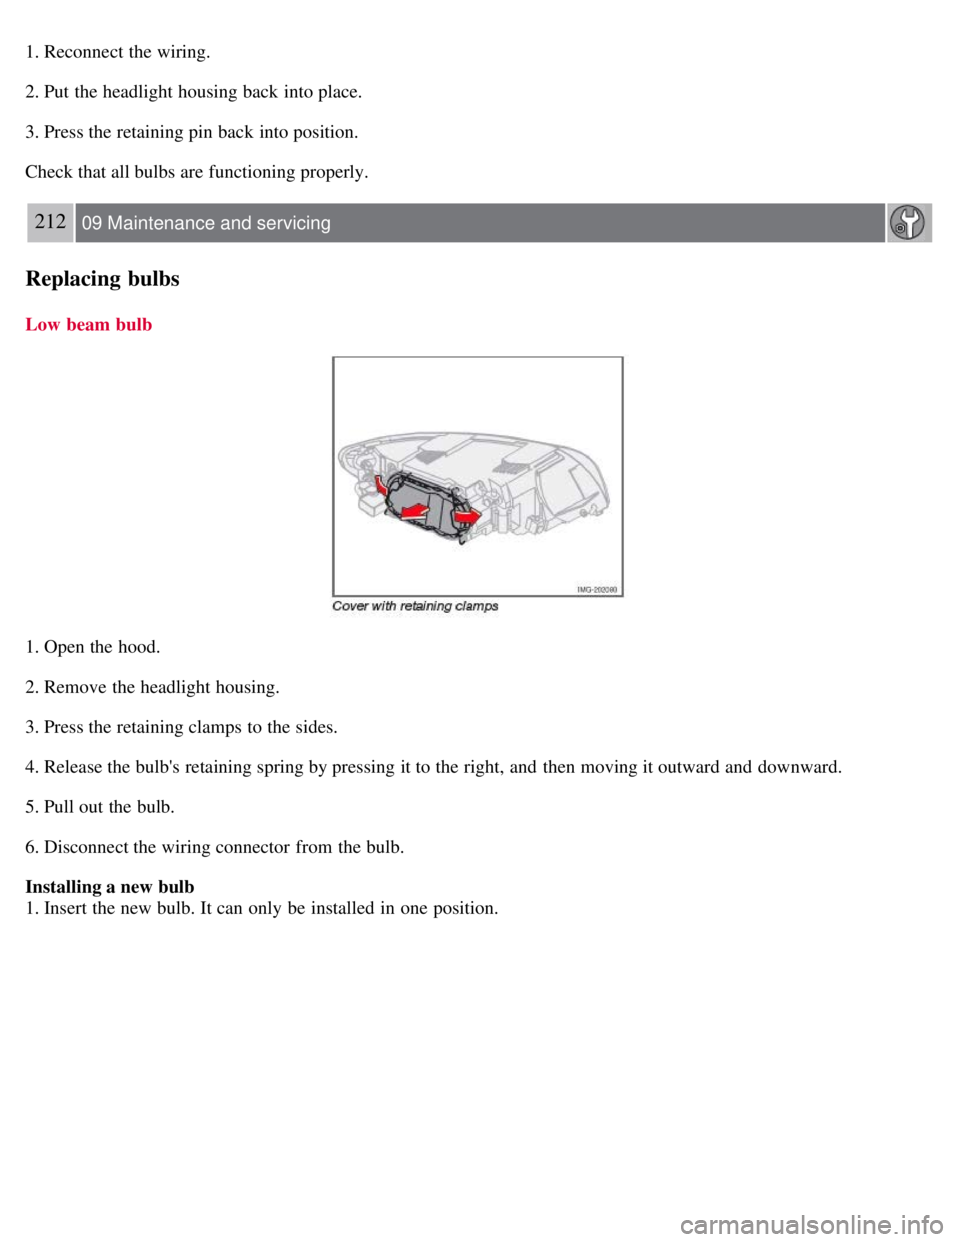 VOLVO C30 2008  Owners Manual 1. Reconnect the wiring.
2. Put the headlight housing back into place.
3. Press the retaining pin back into position.
Check that all bulbs are functioning properly.
212 09 Maintenance and servicing
Re